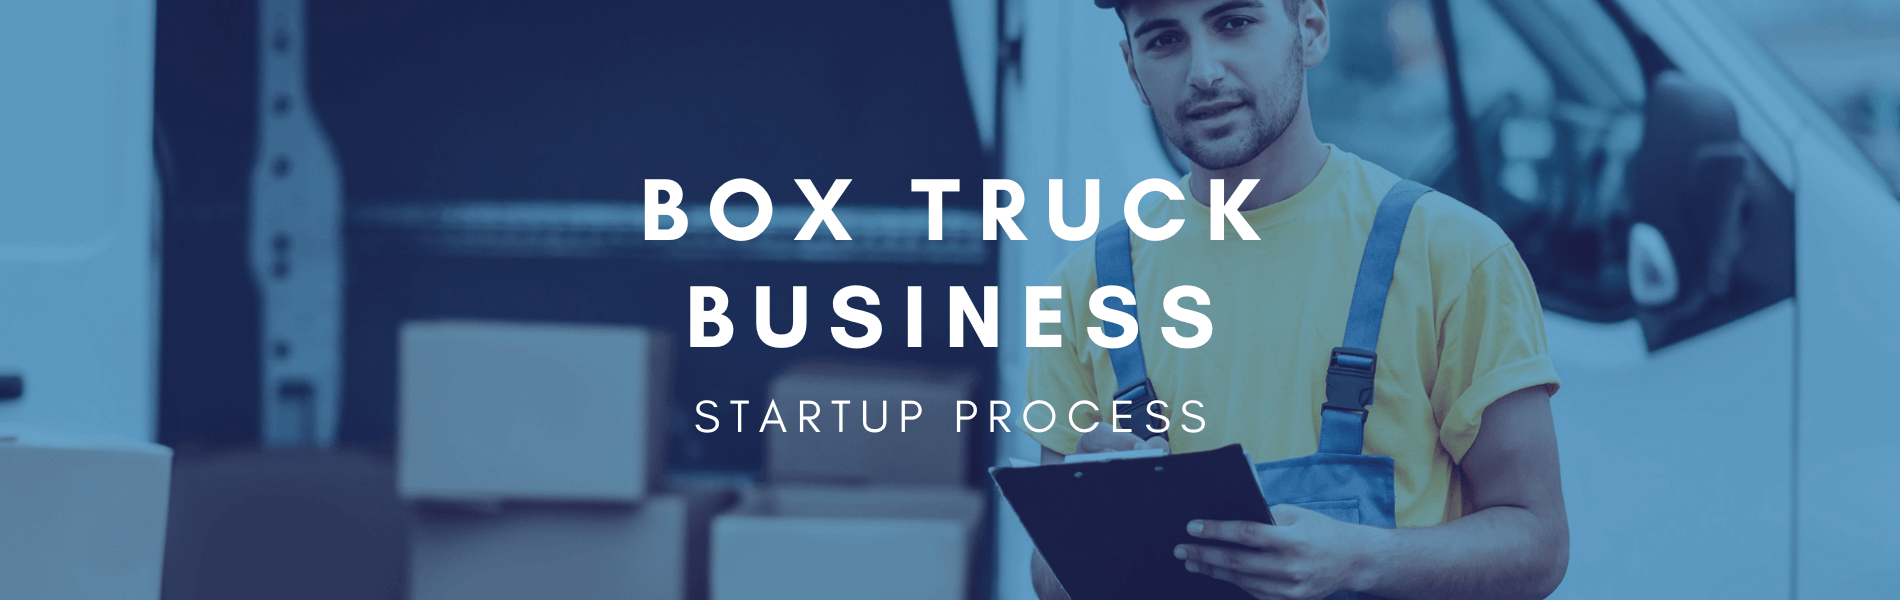 how to make money with a box truck